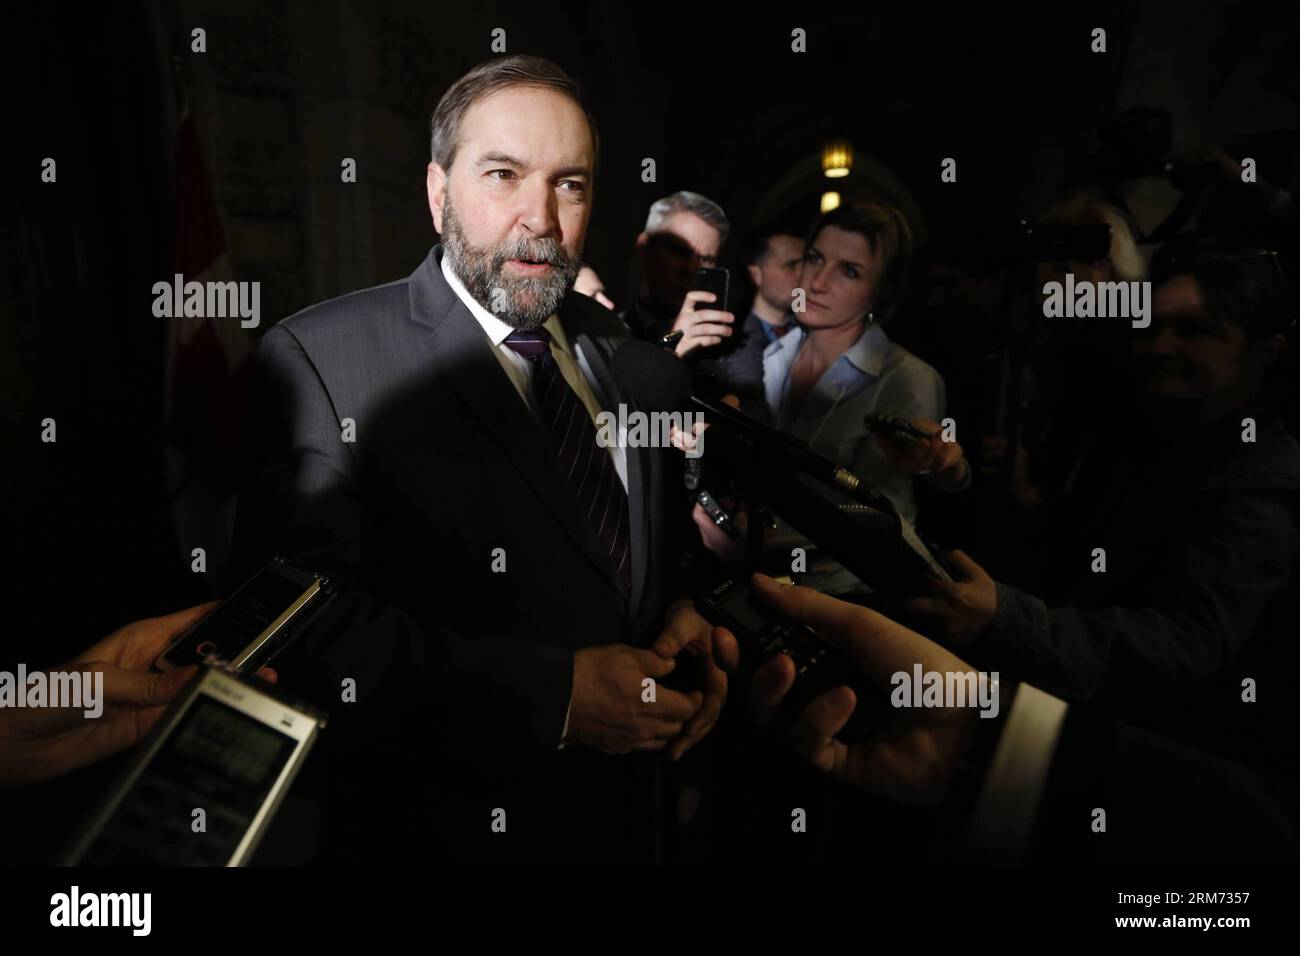 (140212) -- OTTAWA, (Xinhua) -- Thomas Mulcair, leader of the opposition New Democratic Party, speaks to reporters about the new federal budget, unveiled by Finance Minister Jim Flaherty at Parliament Hill in Ottawa, Canada, Feb. 11, 2014. Jim Flaherty on Tuesday unveiled a federal budget projecting a surplus in 2015. (Xinhua/David Kawai) CANADA-OTTAWA-BUDGET PUBLICATIONxNOTxINxCHN   Ottawa XINHUA Thomas  Leader of The Opposition New Democratic Party Speaks to Reporters About The New Federal Budget unveiled by Finance Ministers Jim Flaherty AT Parliament Hill in Ottawa Canada Feb 11 2014 Jim F Stock Photo